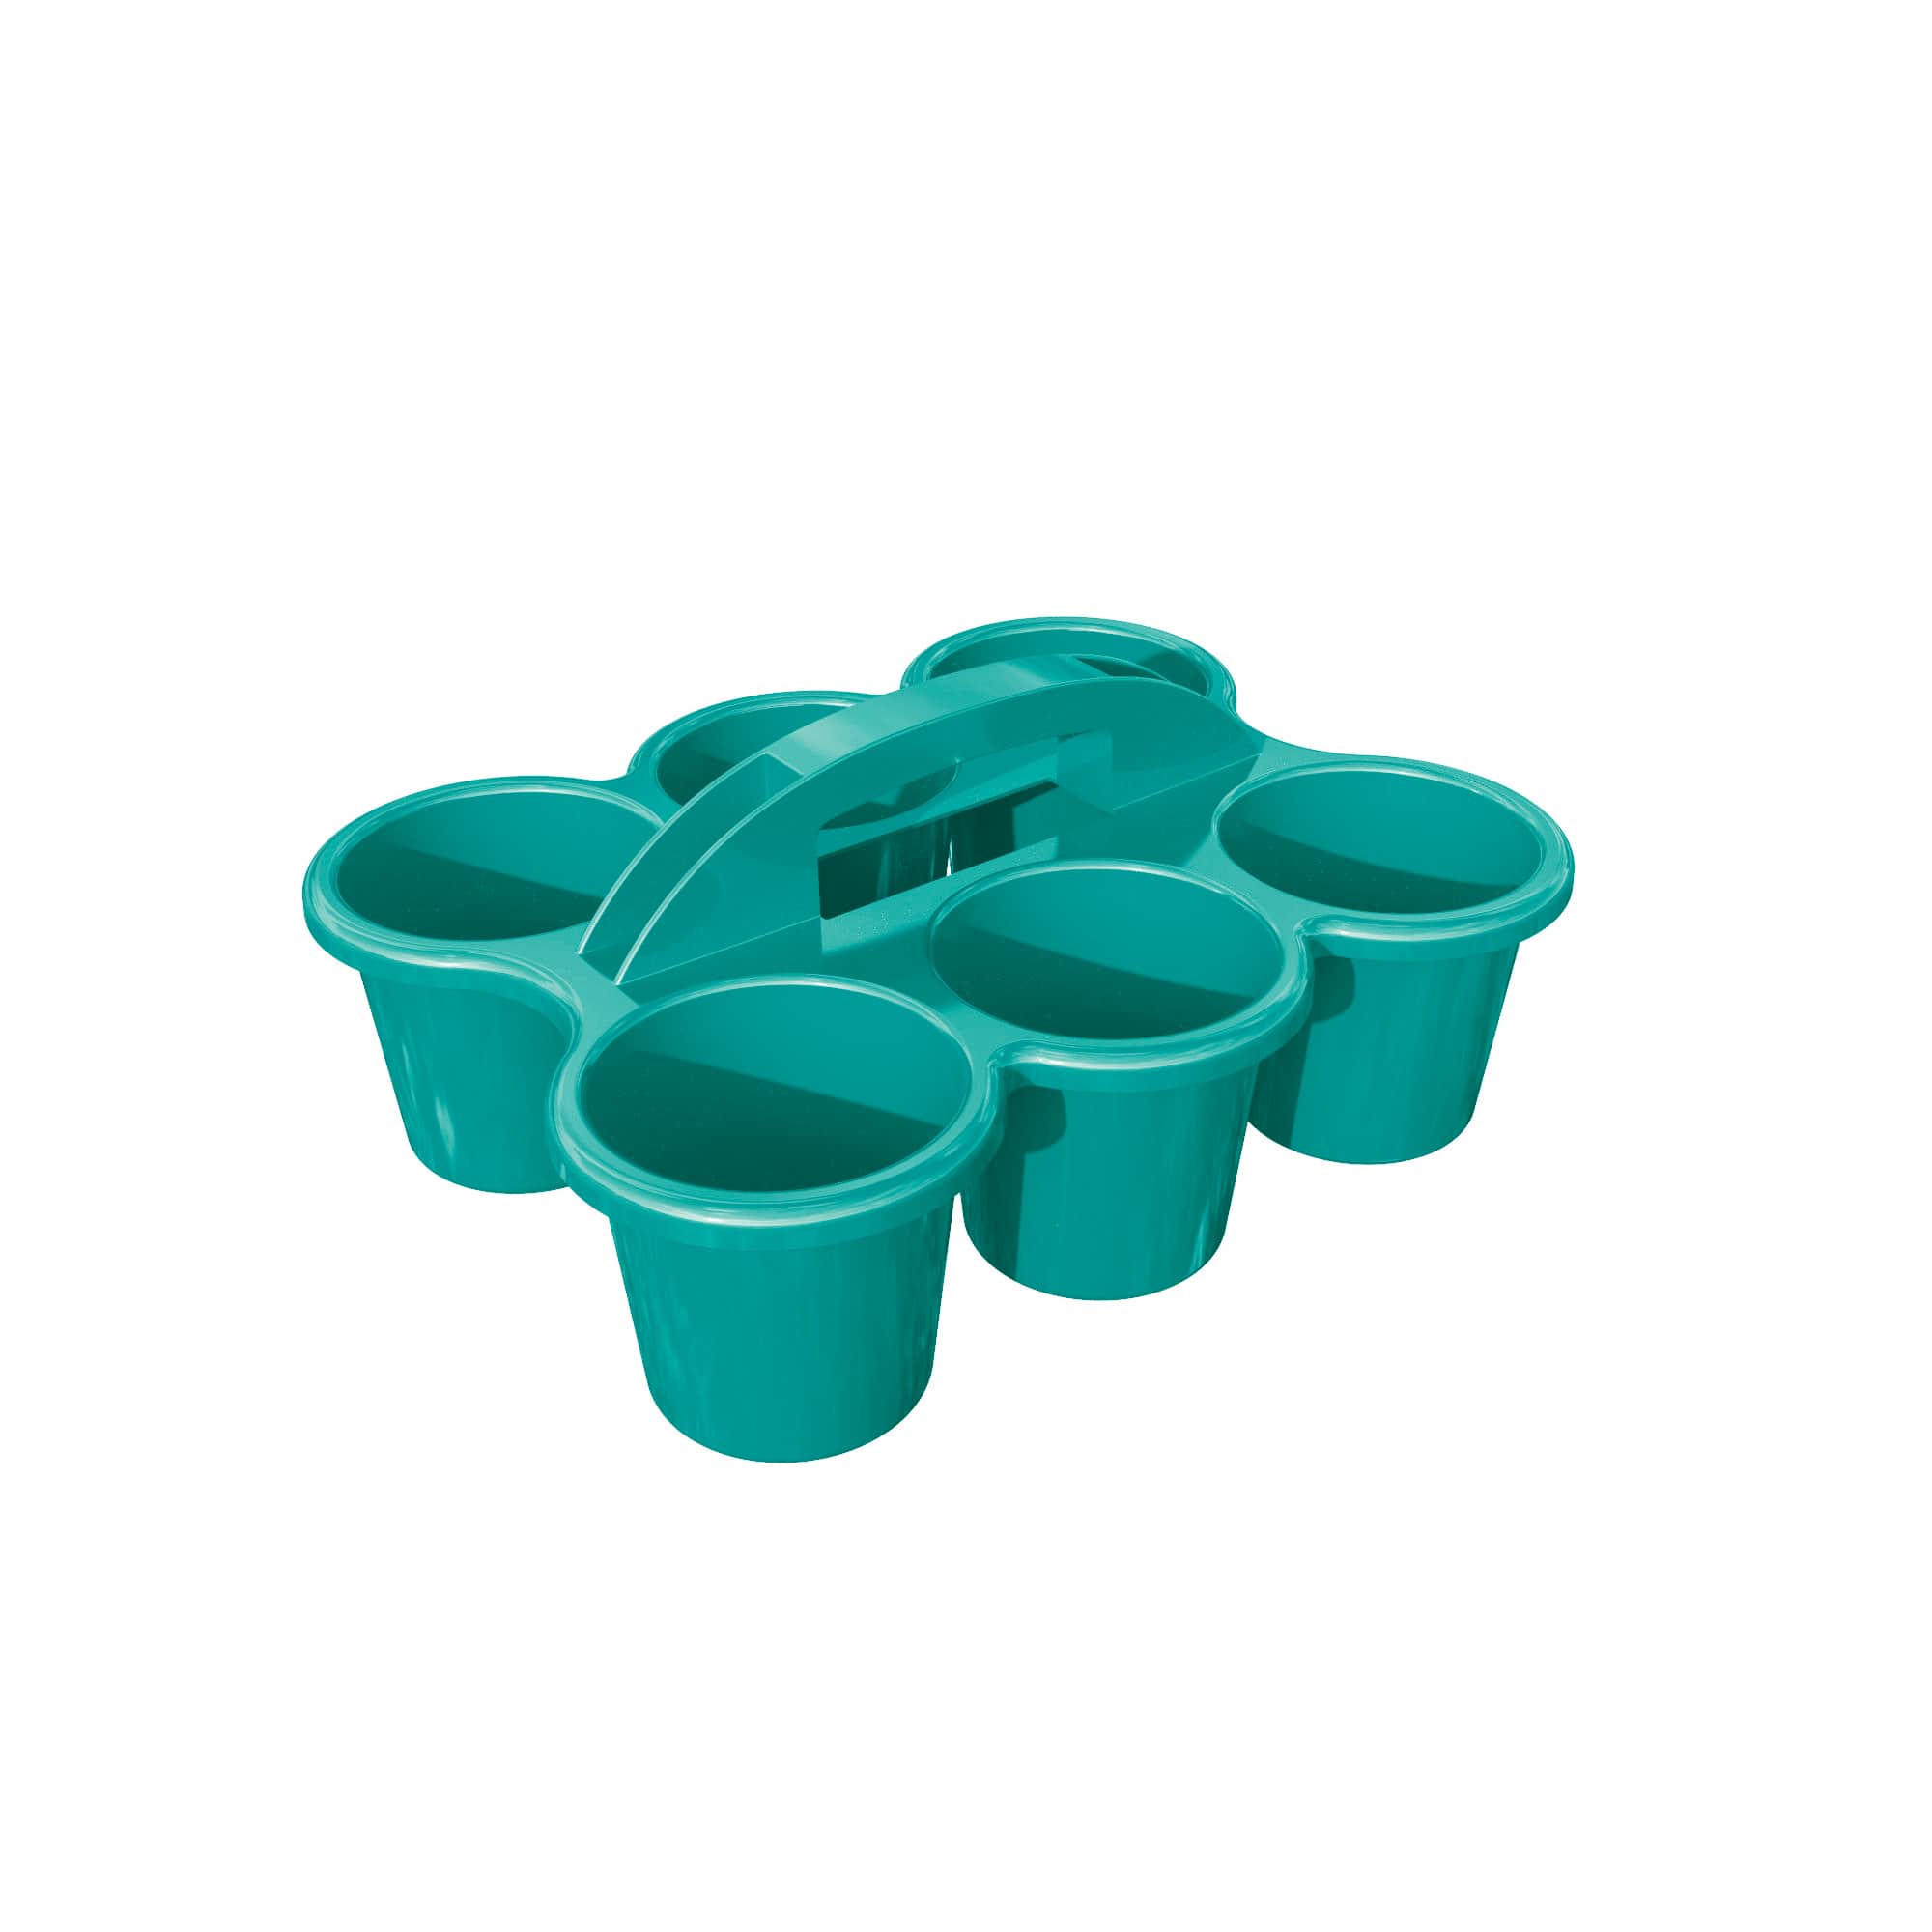 12 Pack: 6-Cup Caddy by Creatology™